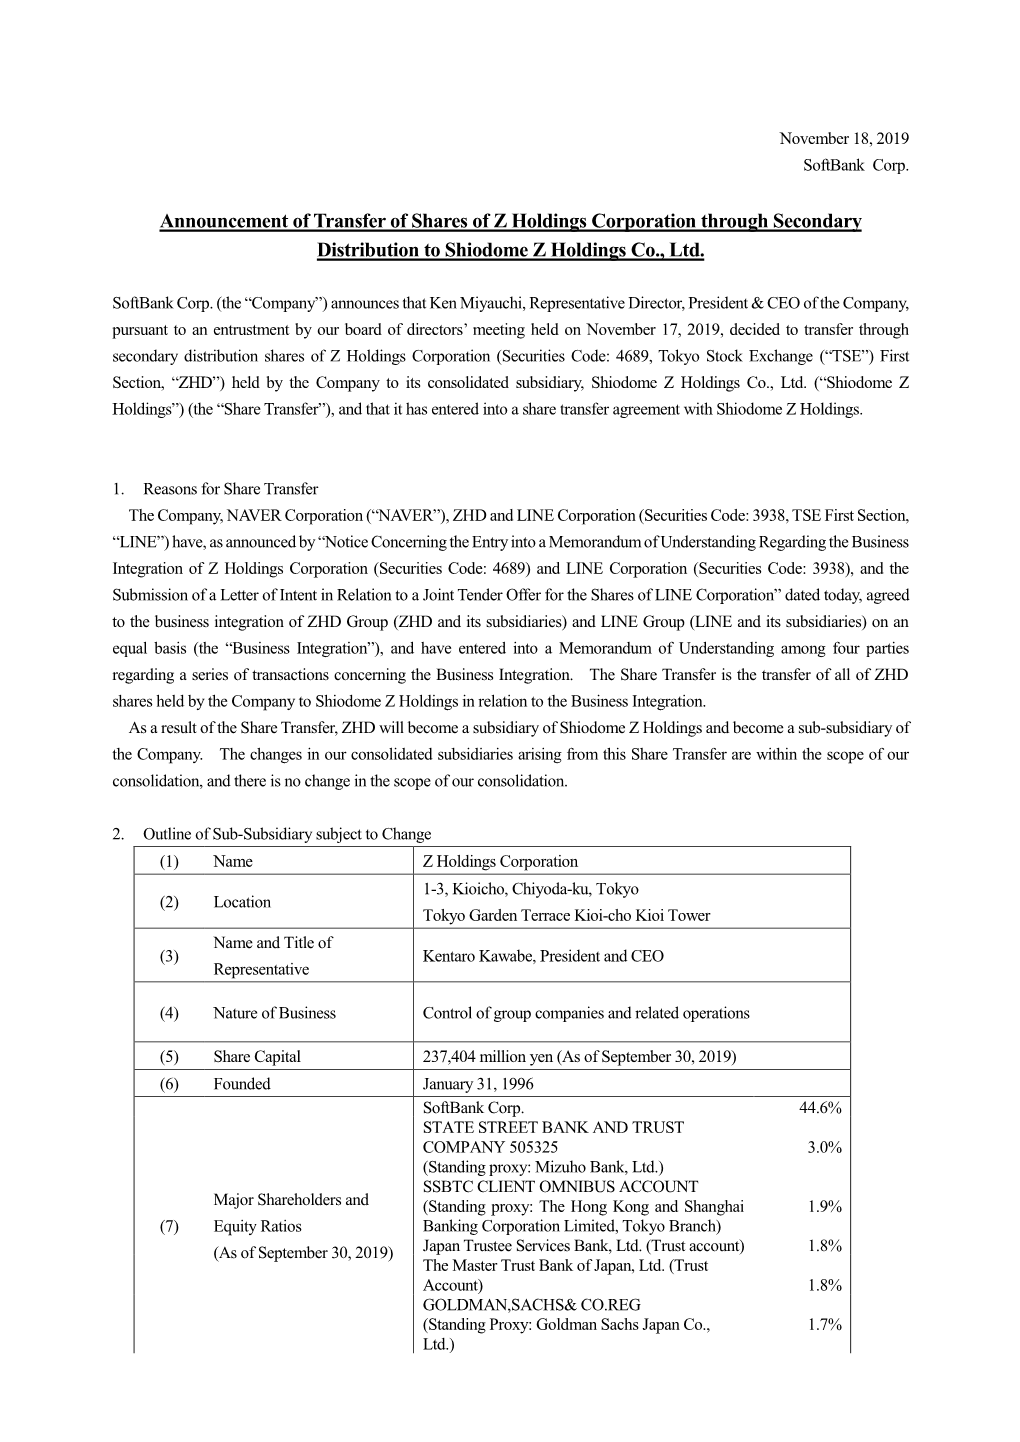 Announcement of Transfer of Shares of Z Holdings Corporation Through Secondary Distribution to Shiodome Z Holdings Co., Ltd